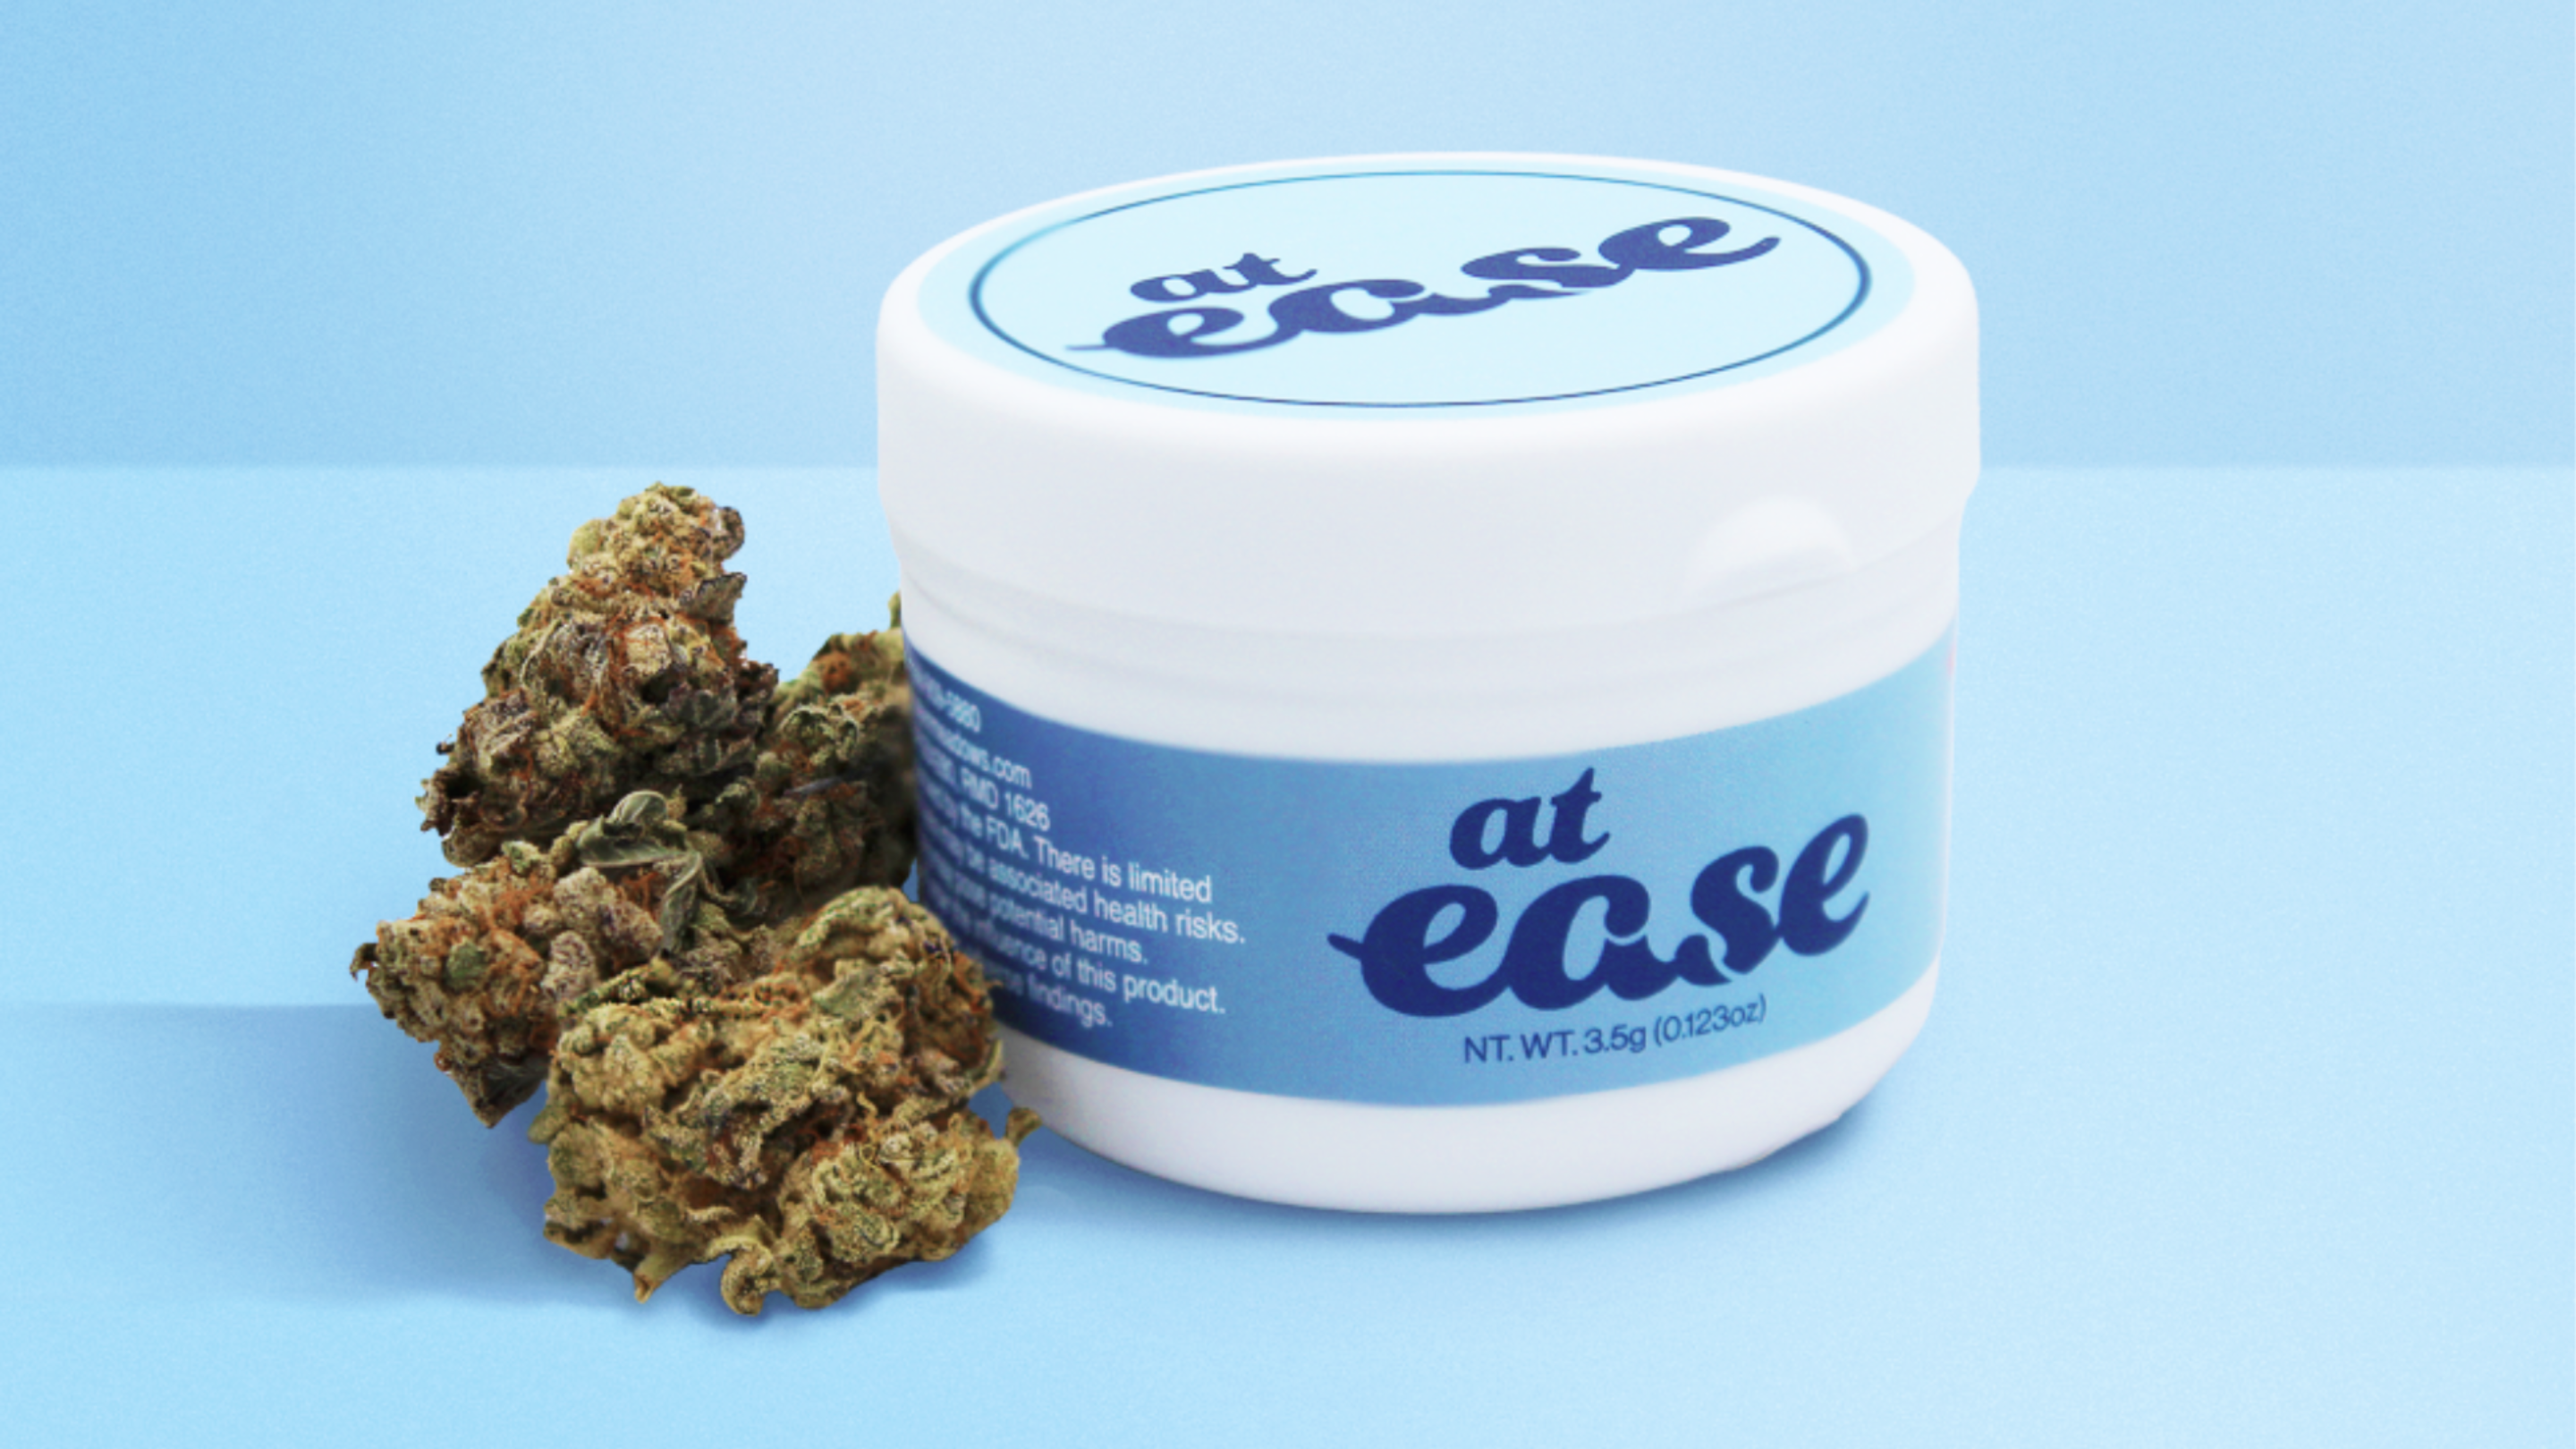 at ease product photography on baby blue background with cannabis flower in shot